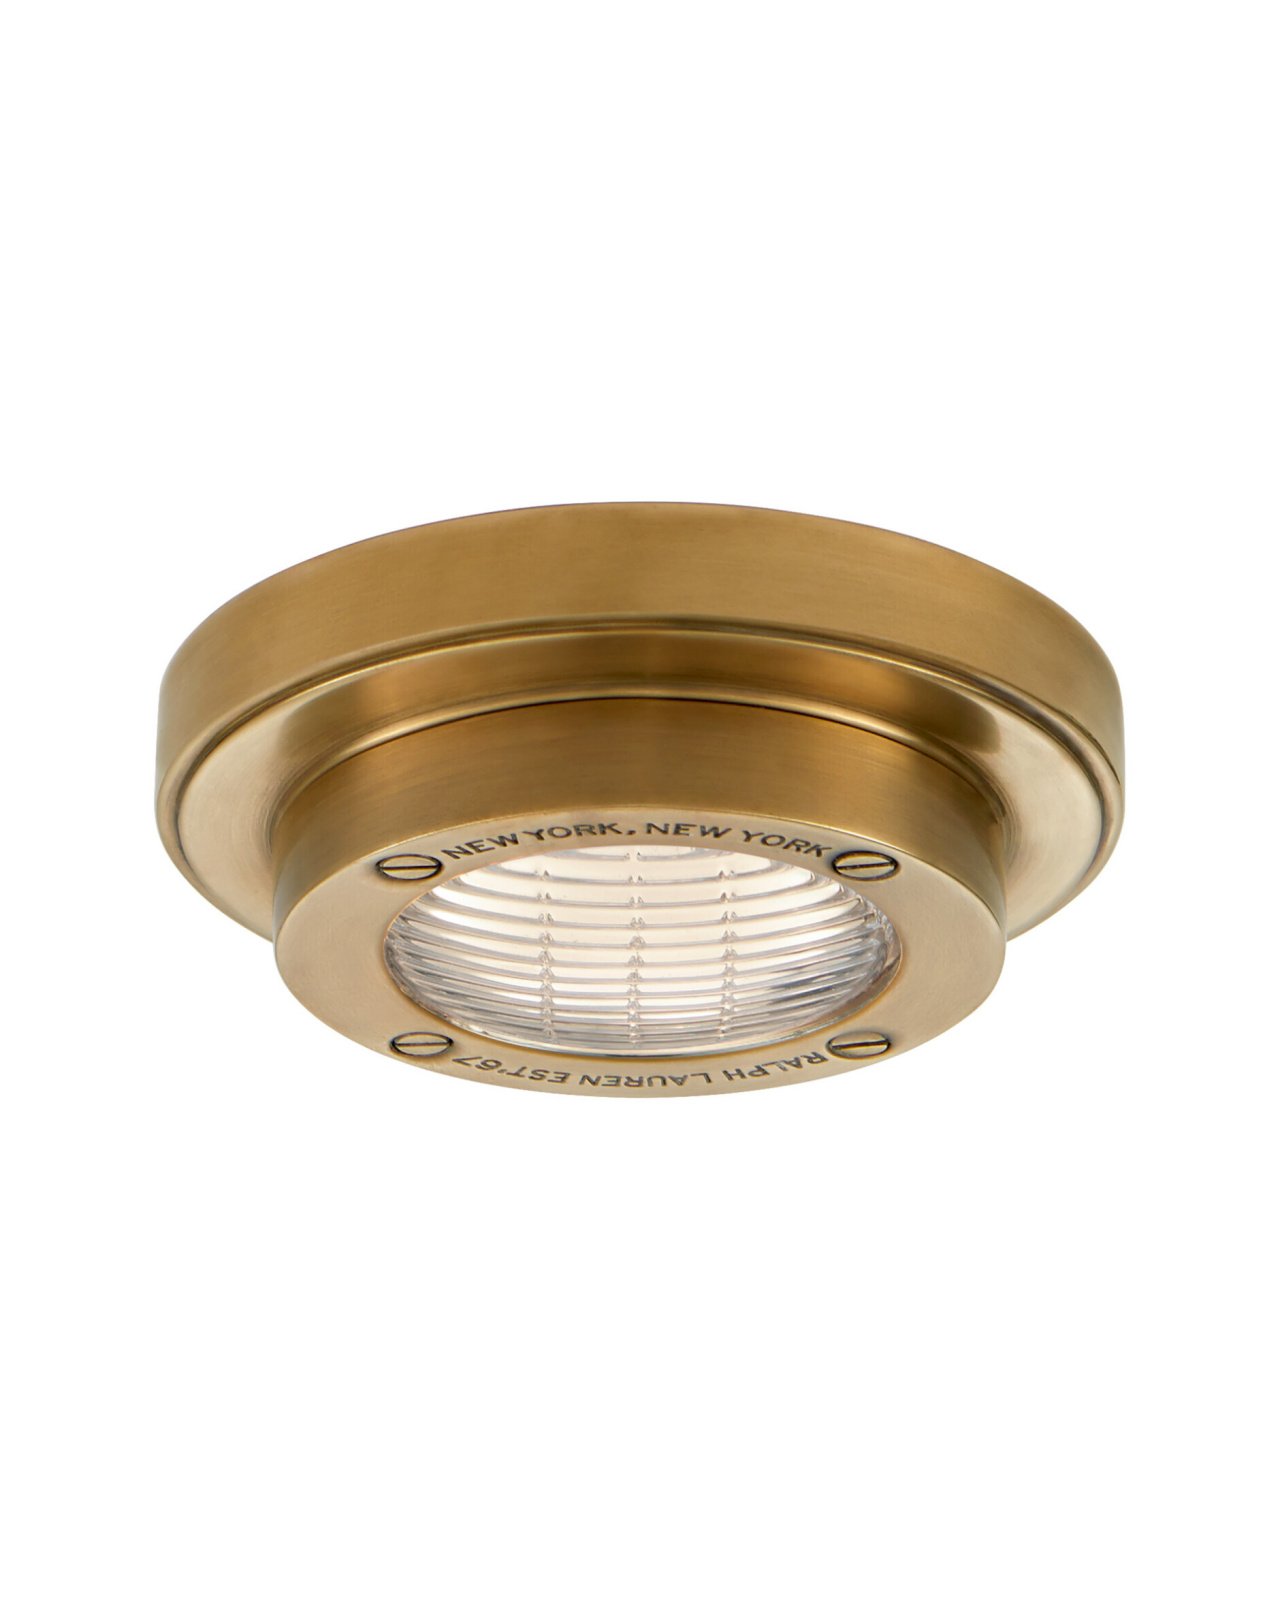 Grant 4.5" Solitaire Flush Mount Natural Brass